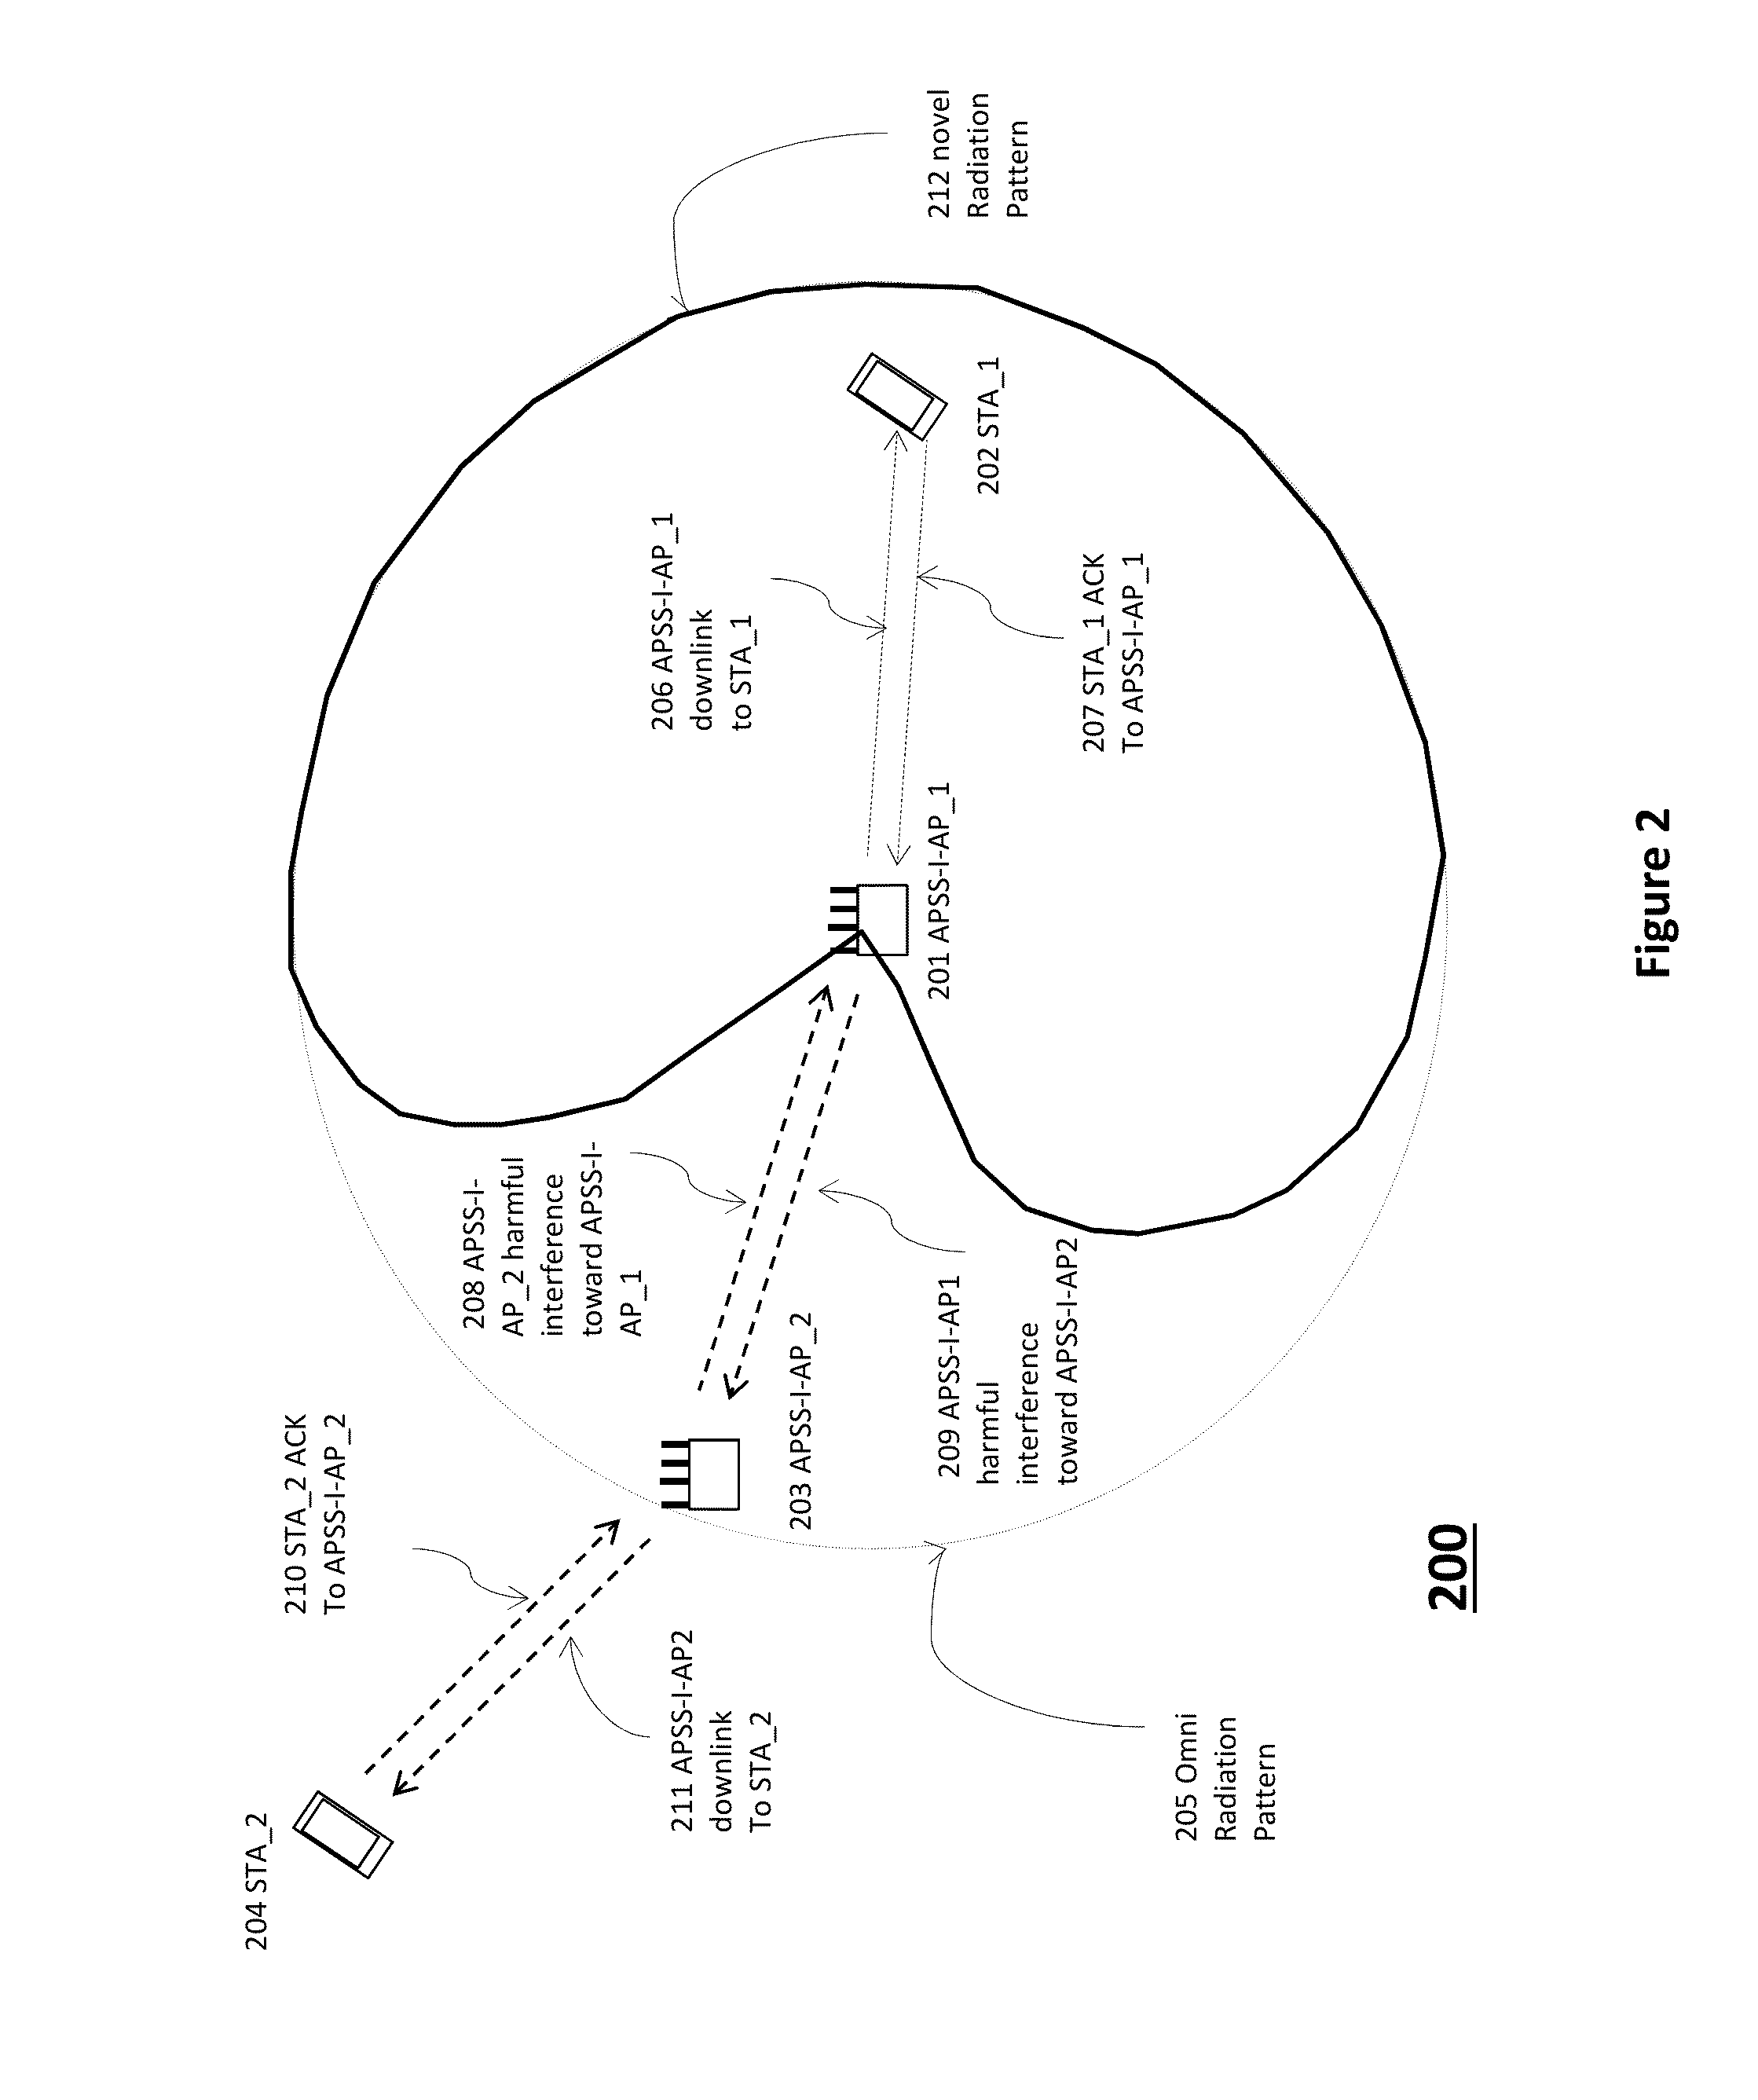 Method and system for supporting sparse explicit sounding by implicit data